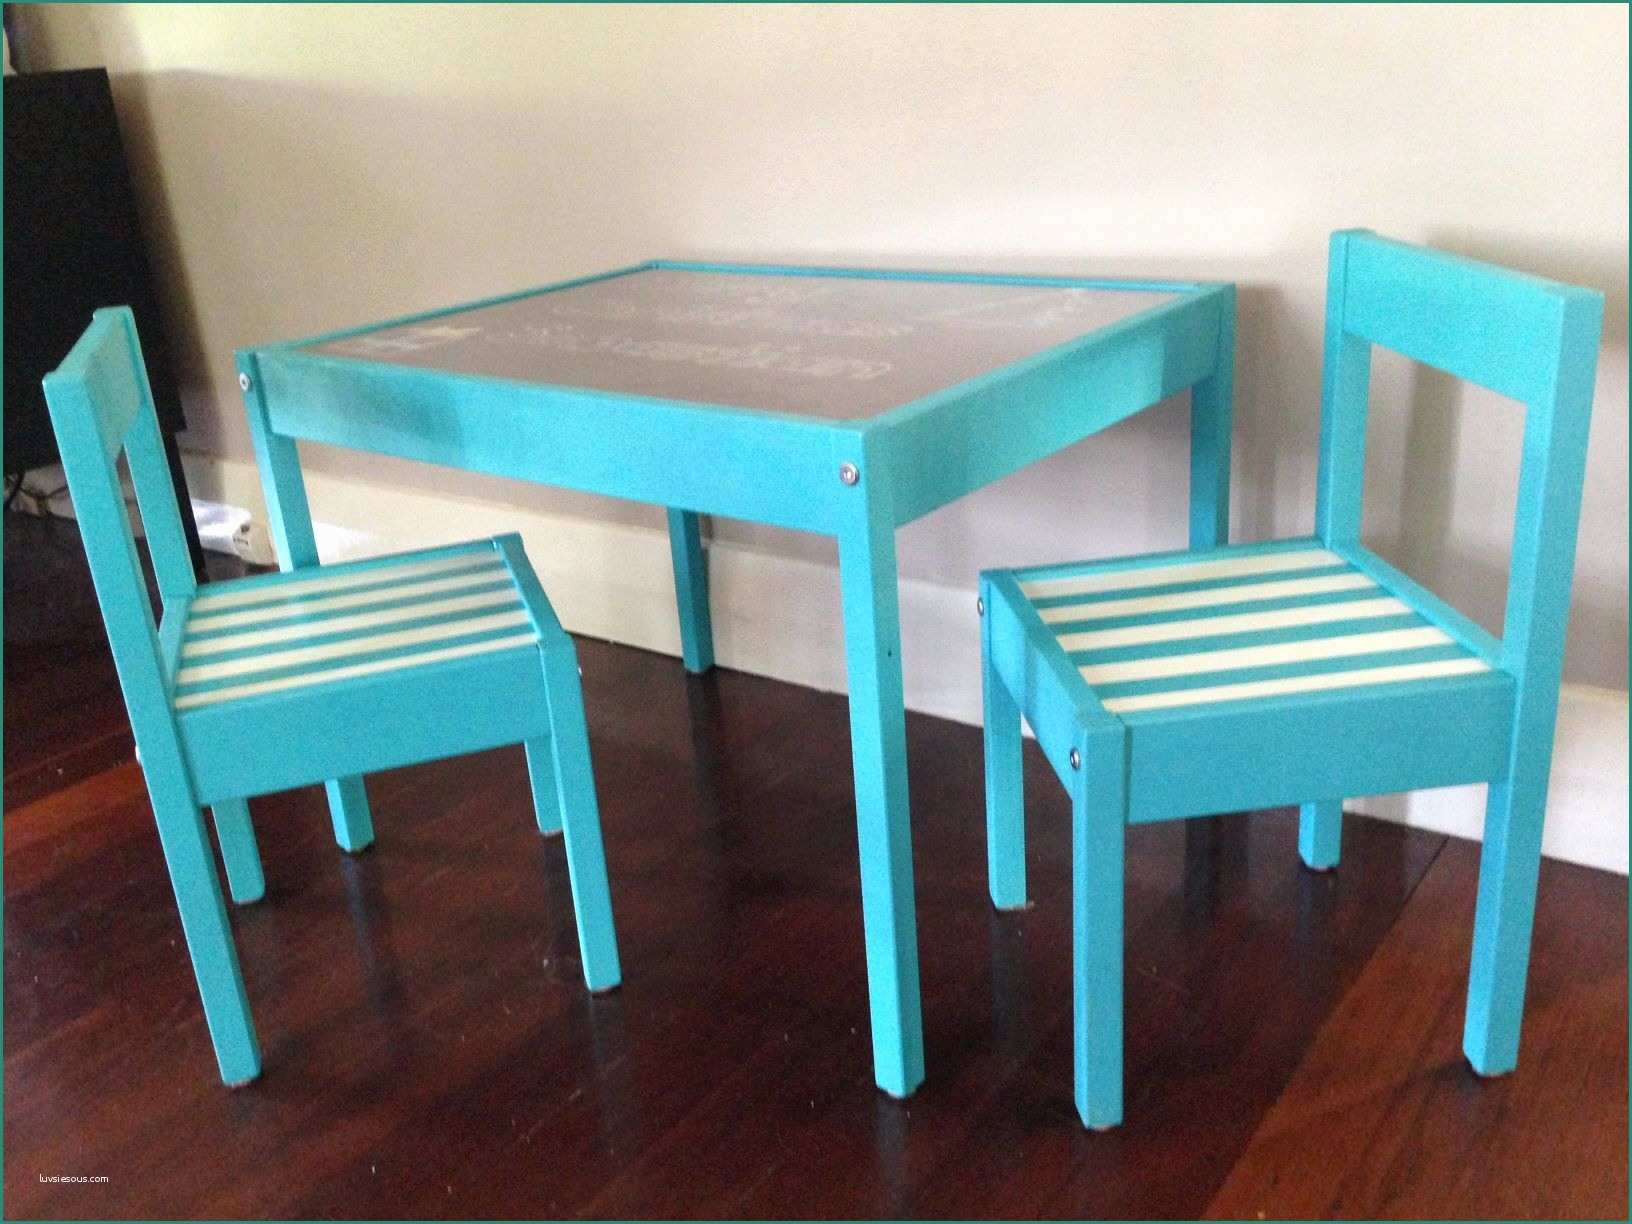 Sedie Legno Colorate E Ikea Latt Kids Table Hack All Parts Spray Painted before assembly